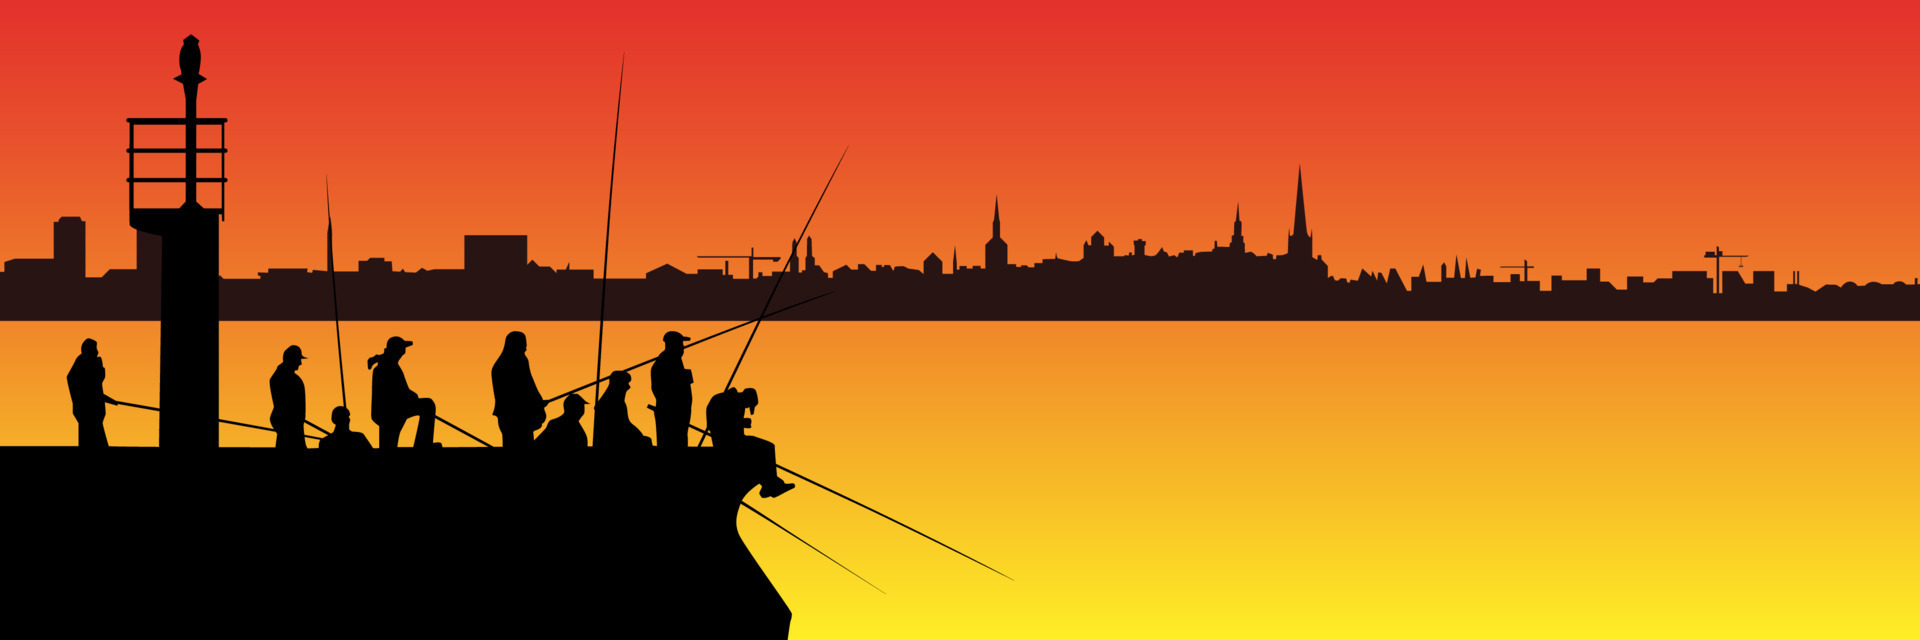 Silhouettes of fishermen with fishing rods on pier with lighthouse